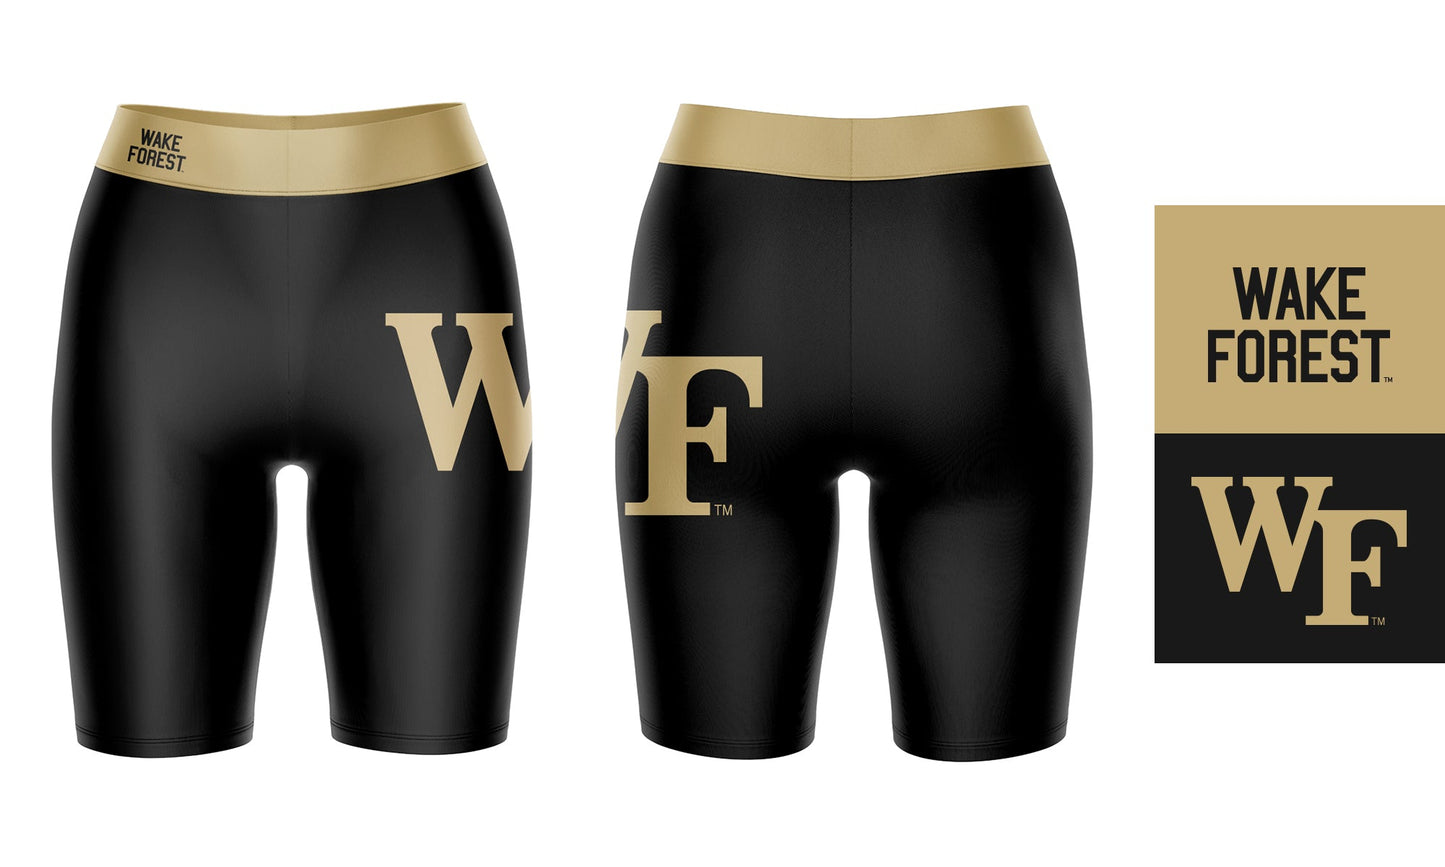 WF Demon Deacons Vive La Fete Game Day Logo on Thigh and Waistband Black and Gold Women Bike Short 9 Inseam